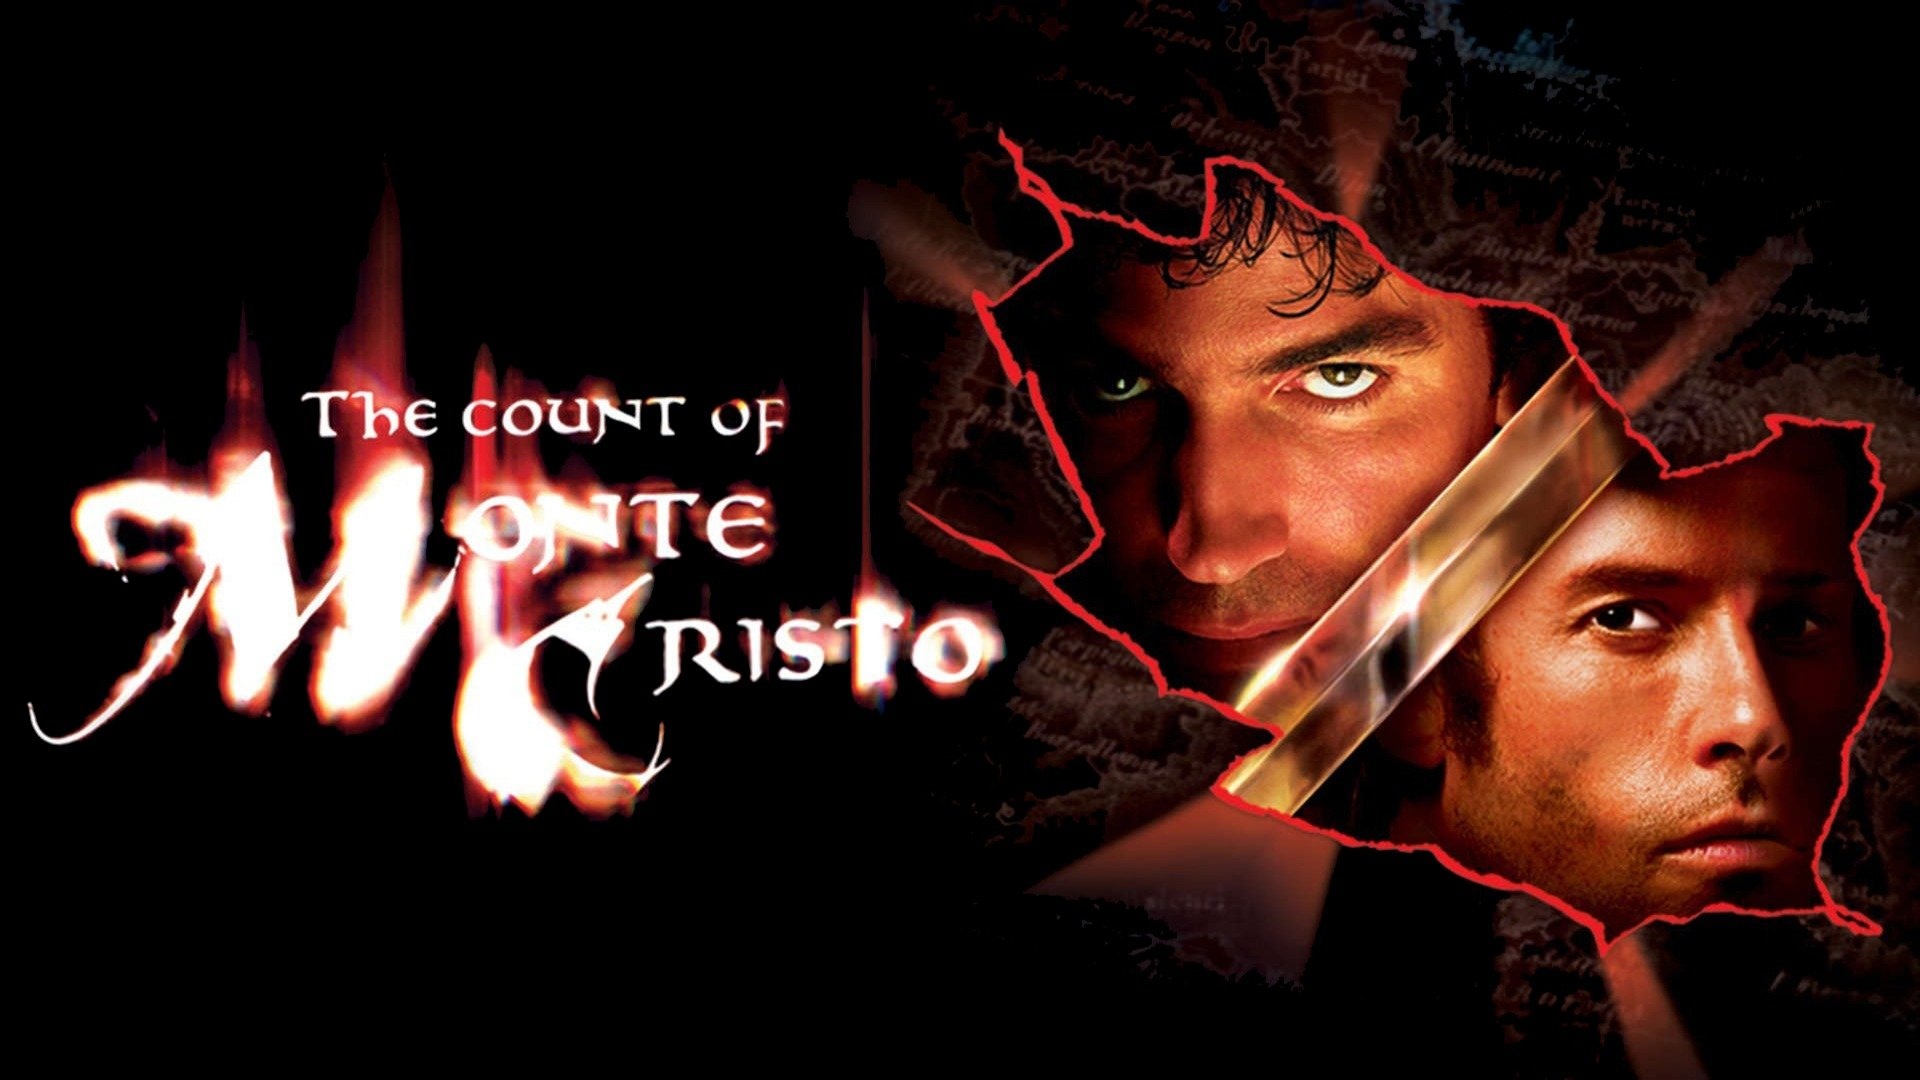 The Count of Monte Cristo, watch full movie, movies, 1920x1080 Full HD Desktop